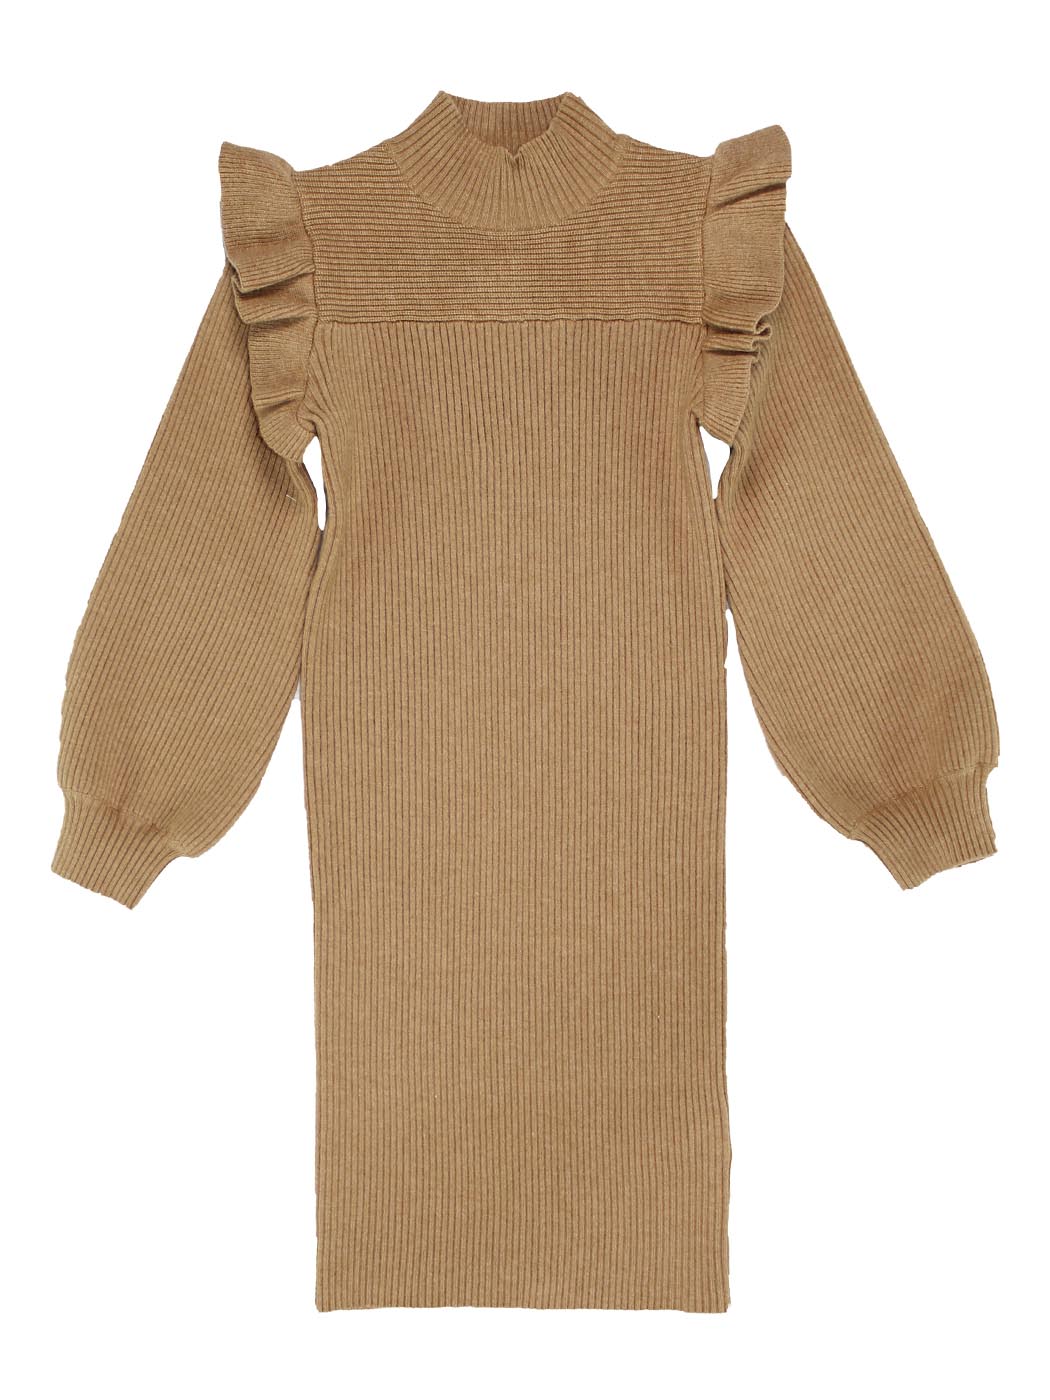 Girl's Knitted dress with ruffles - TBT1325 camel